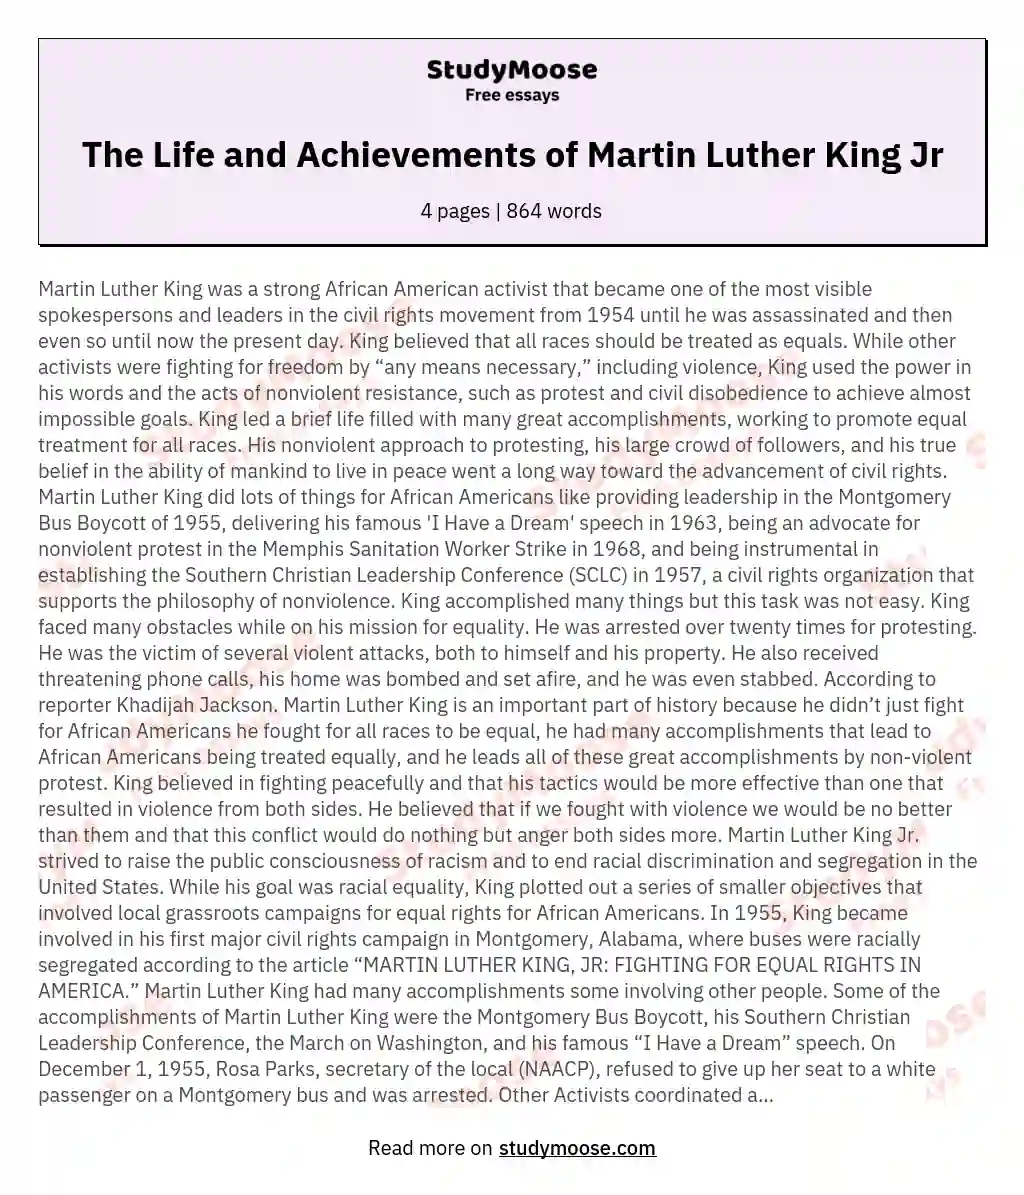 The Life and Achievements of Martin Luther King Jr essay